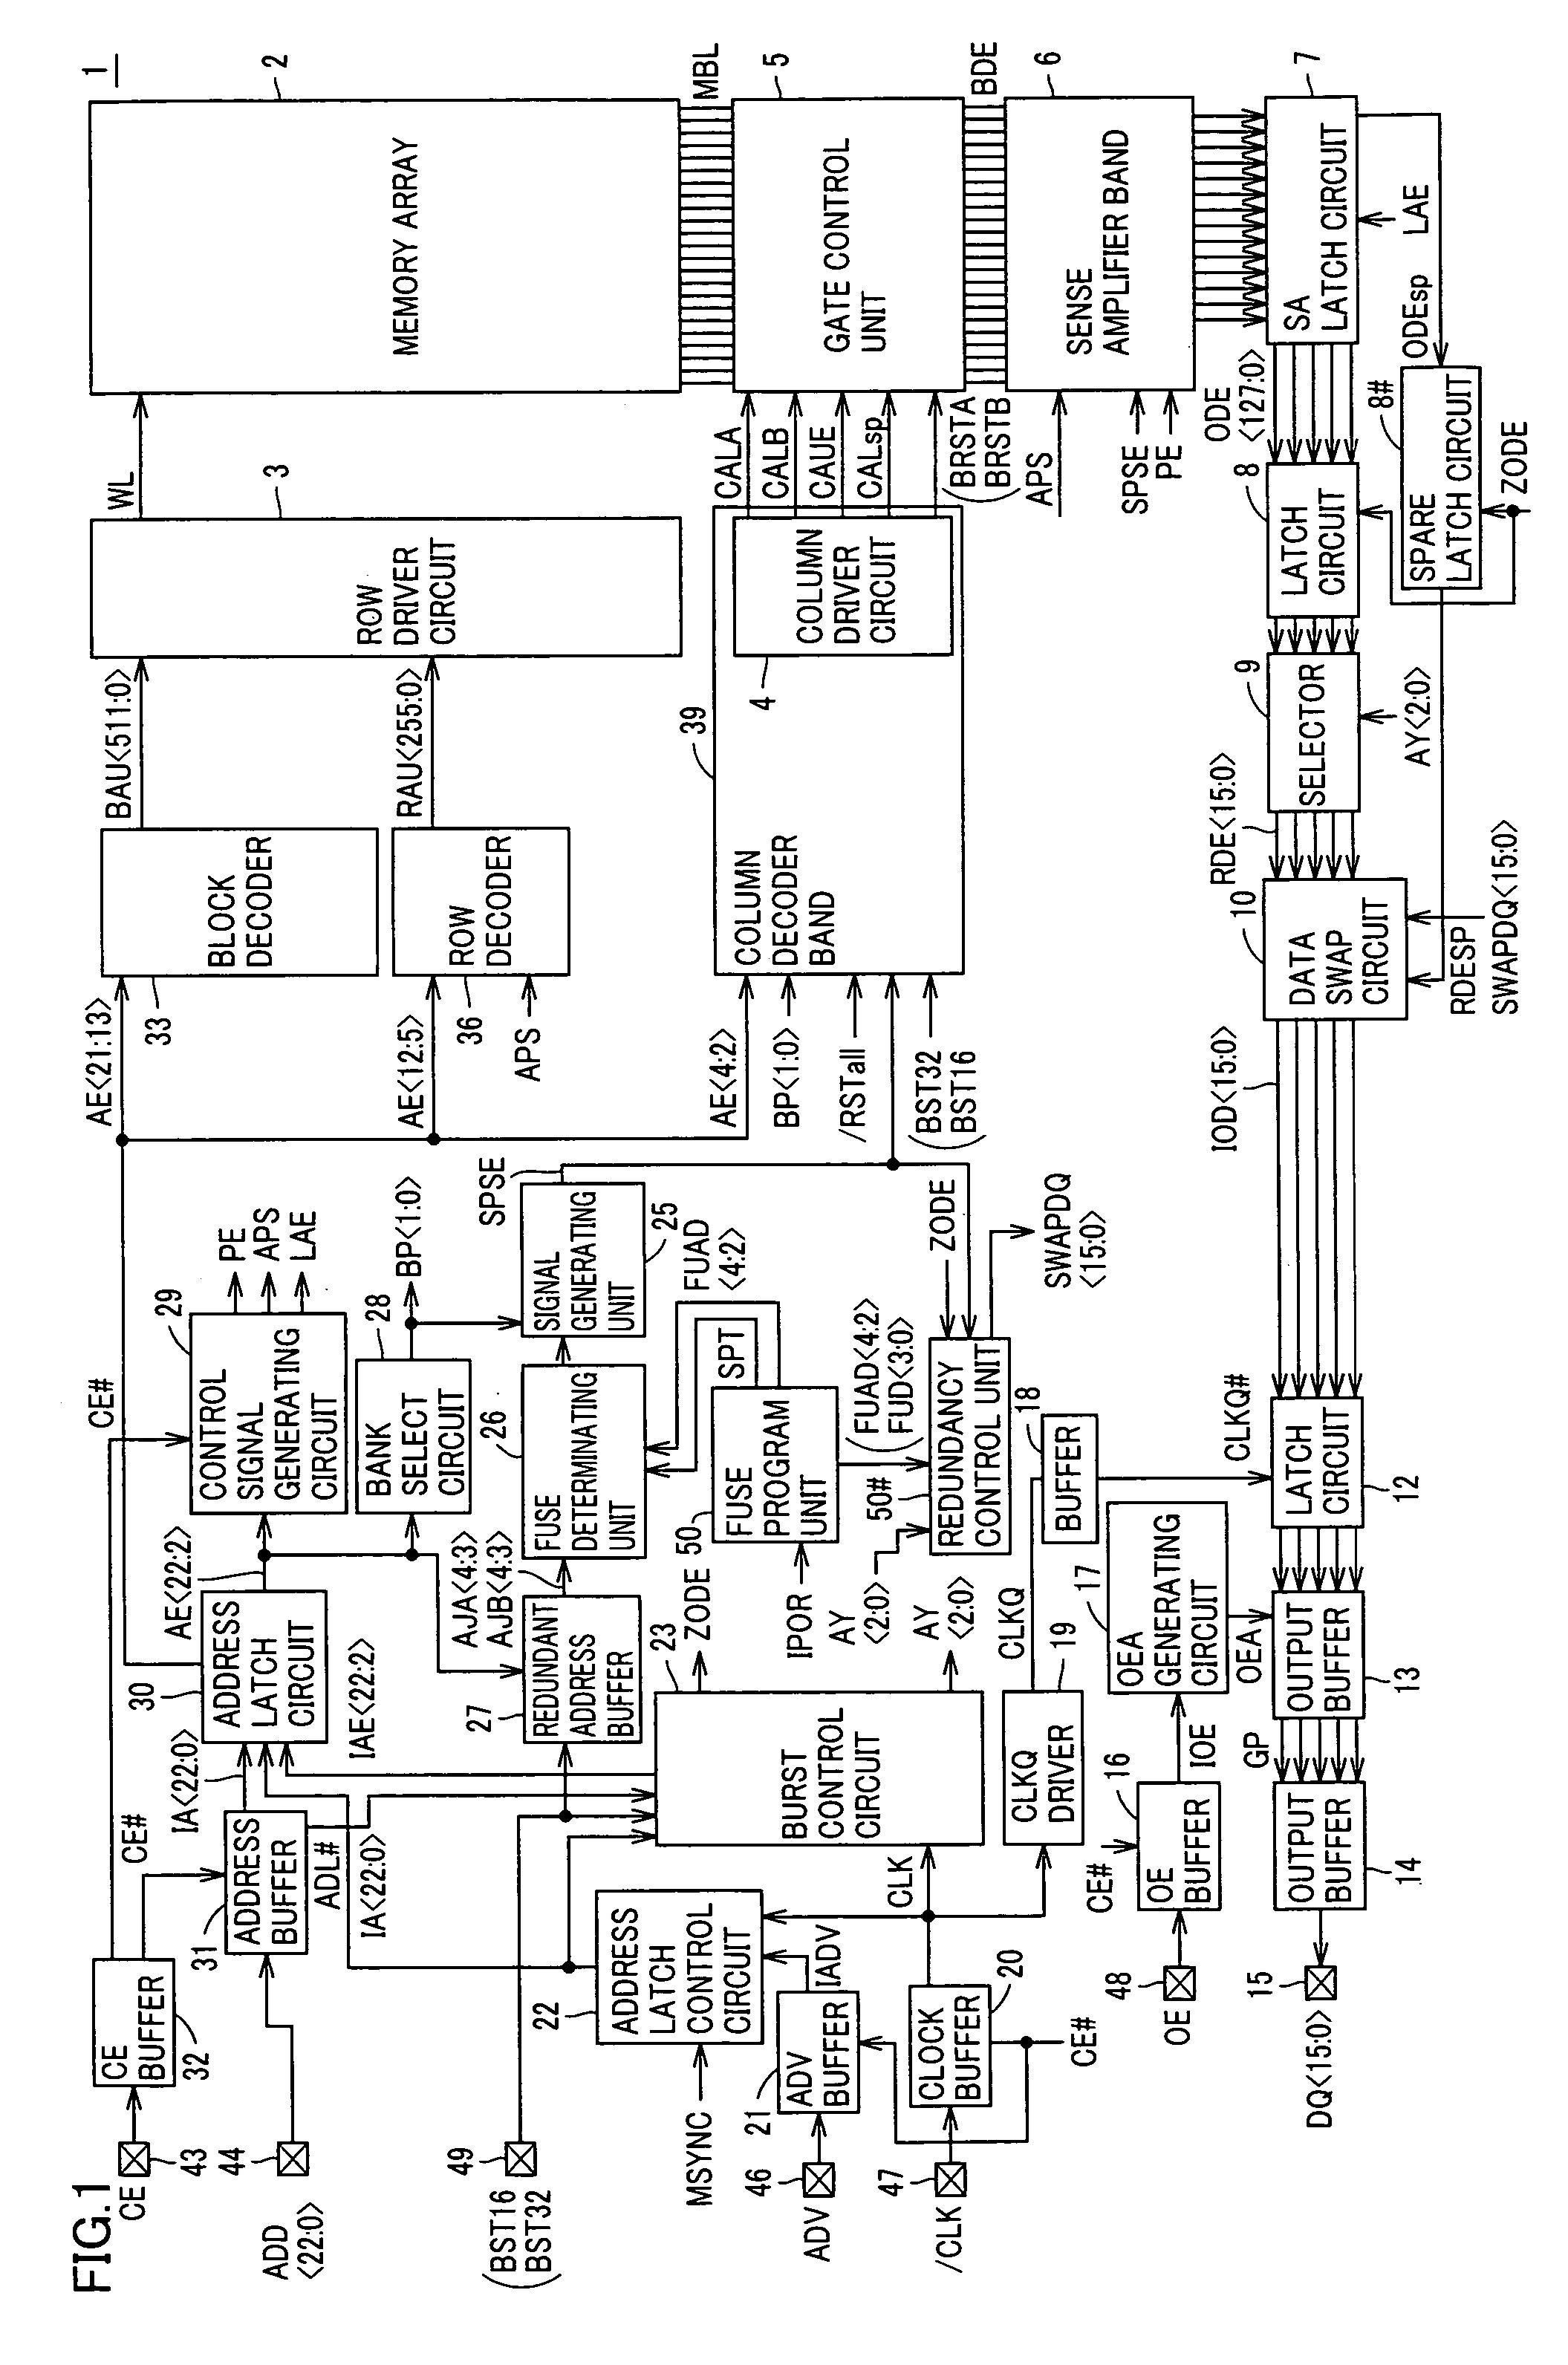 Semiconductor memory device for improving access time in burst mode